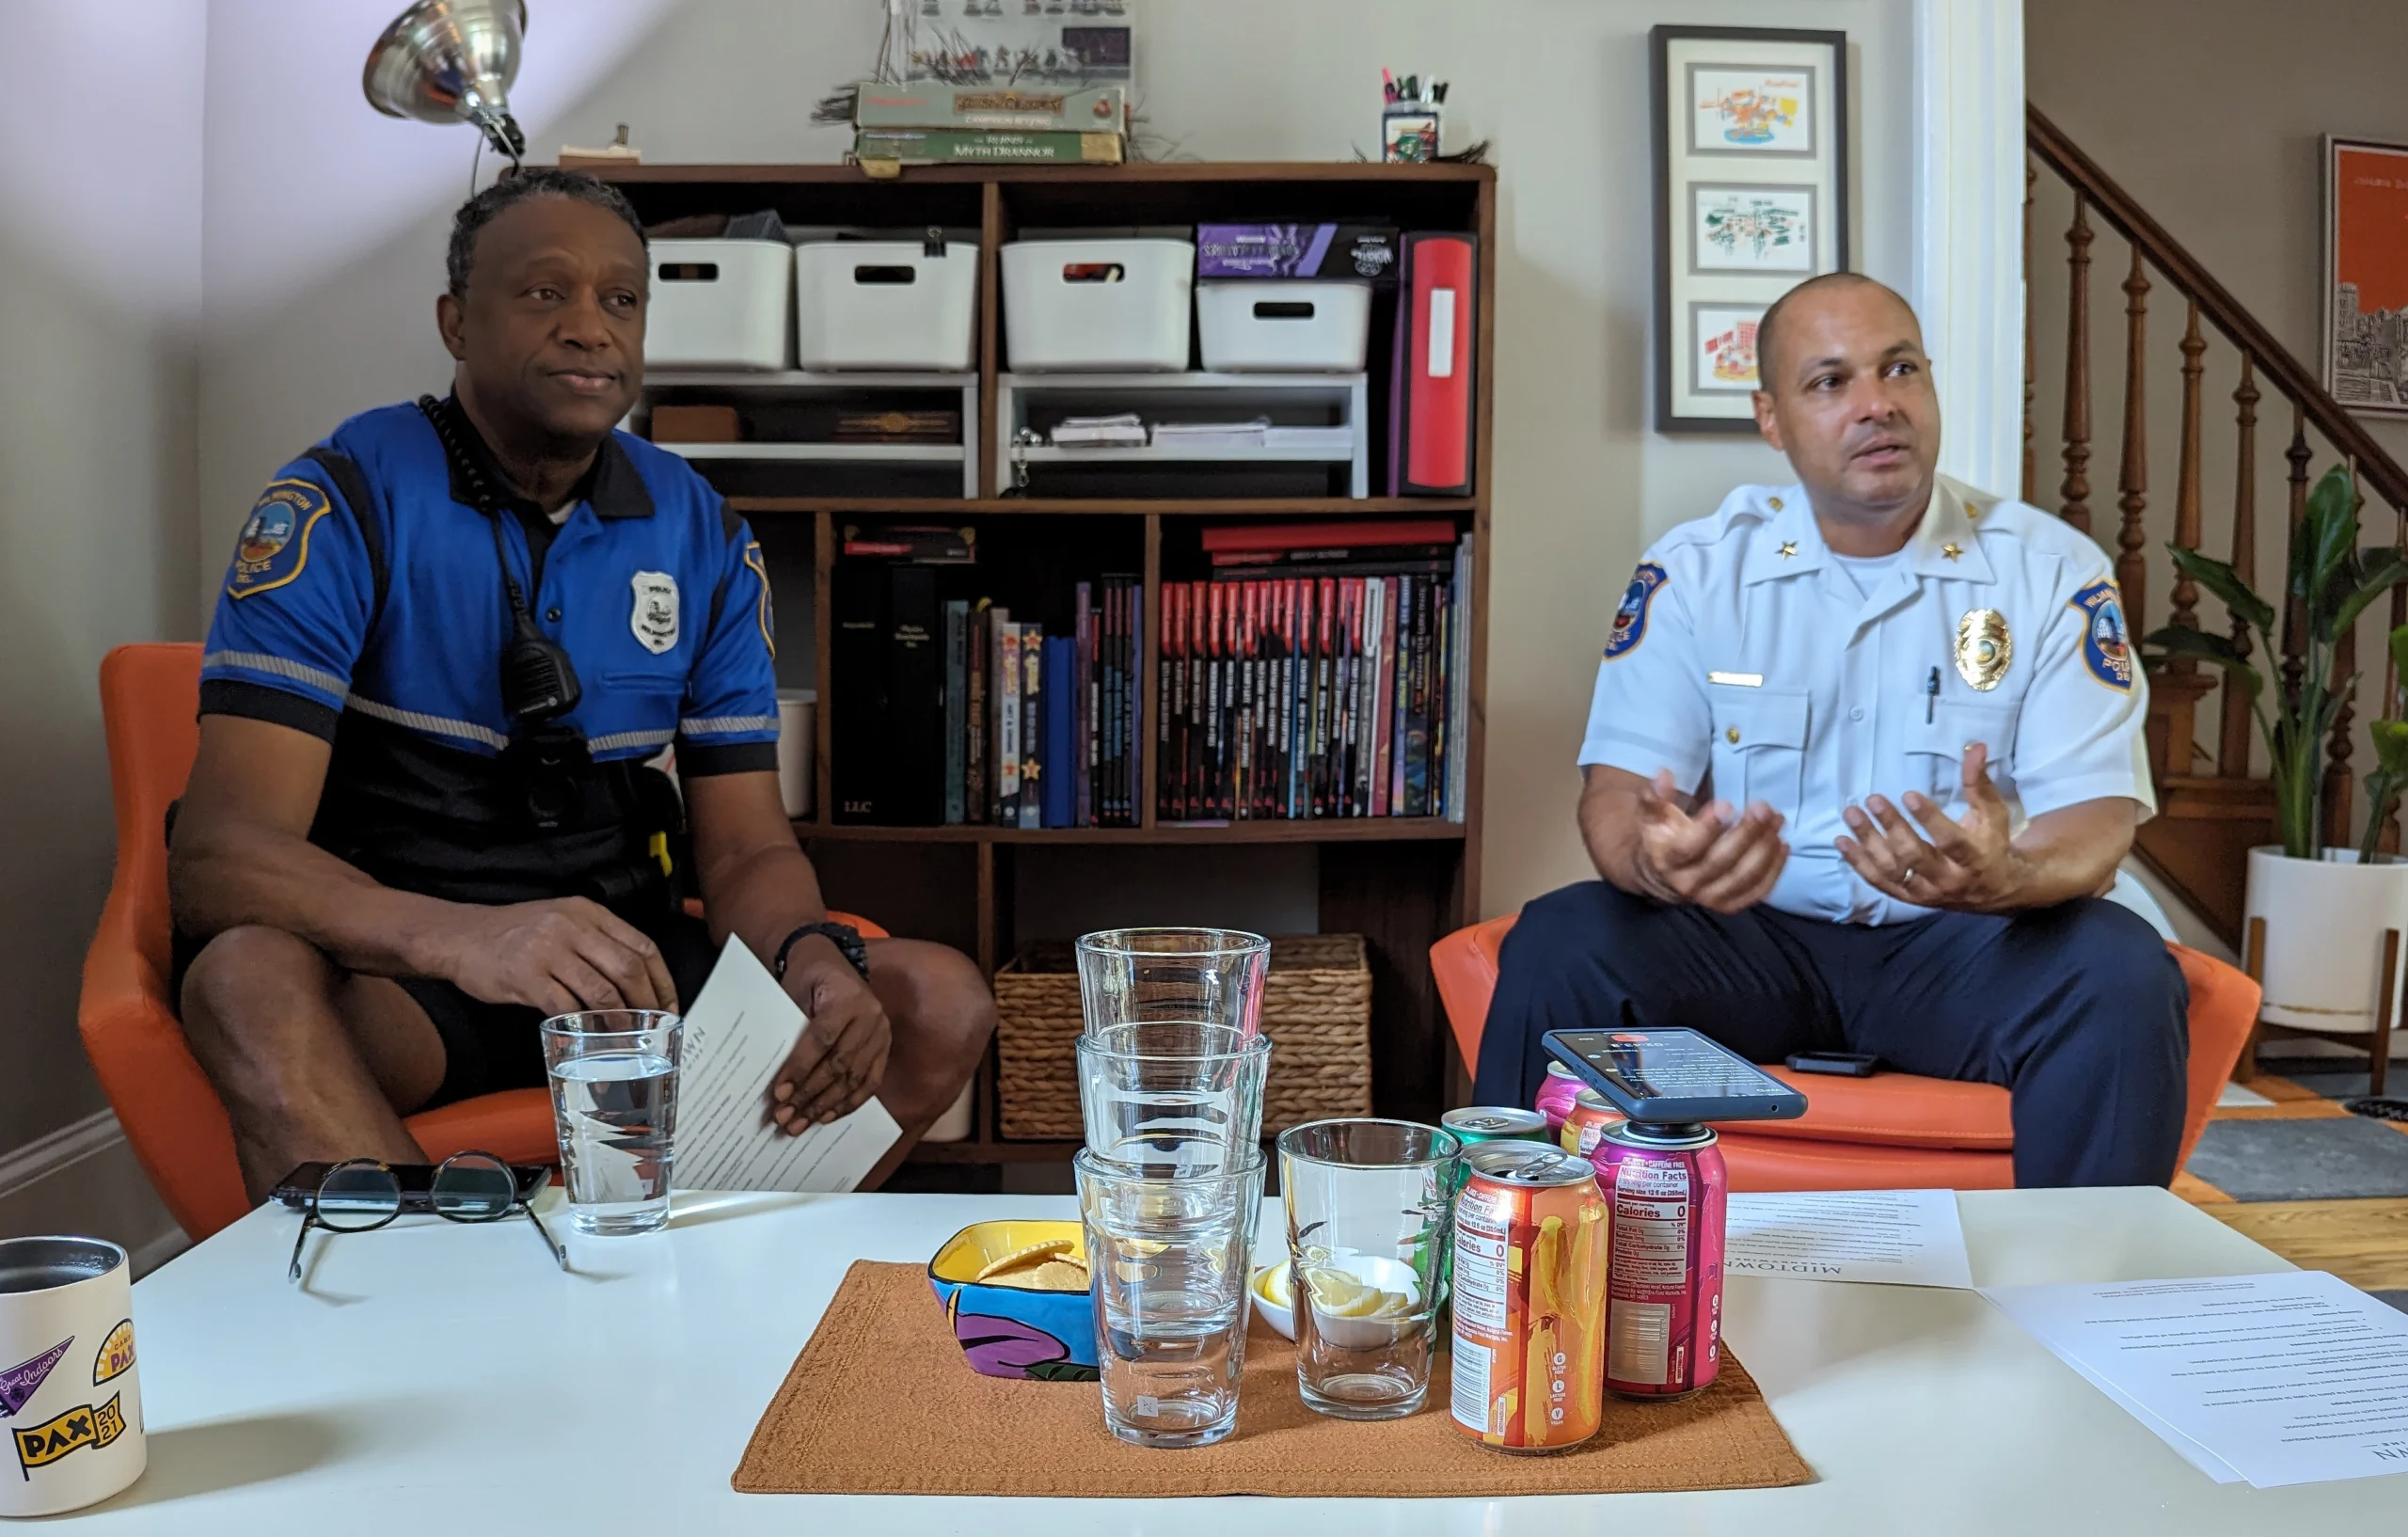 Wilmington (Delaware) Police Department Chief Wilfredo Campos and Master Corporal Anthony Easterling sitting for an interview with Midtown Brandywine News, focusing on community policing and engagement, in August 2023